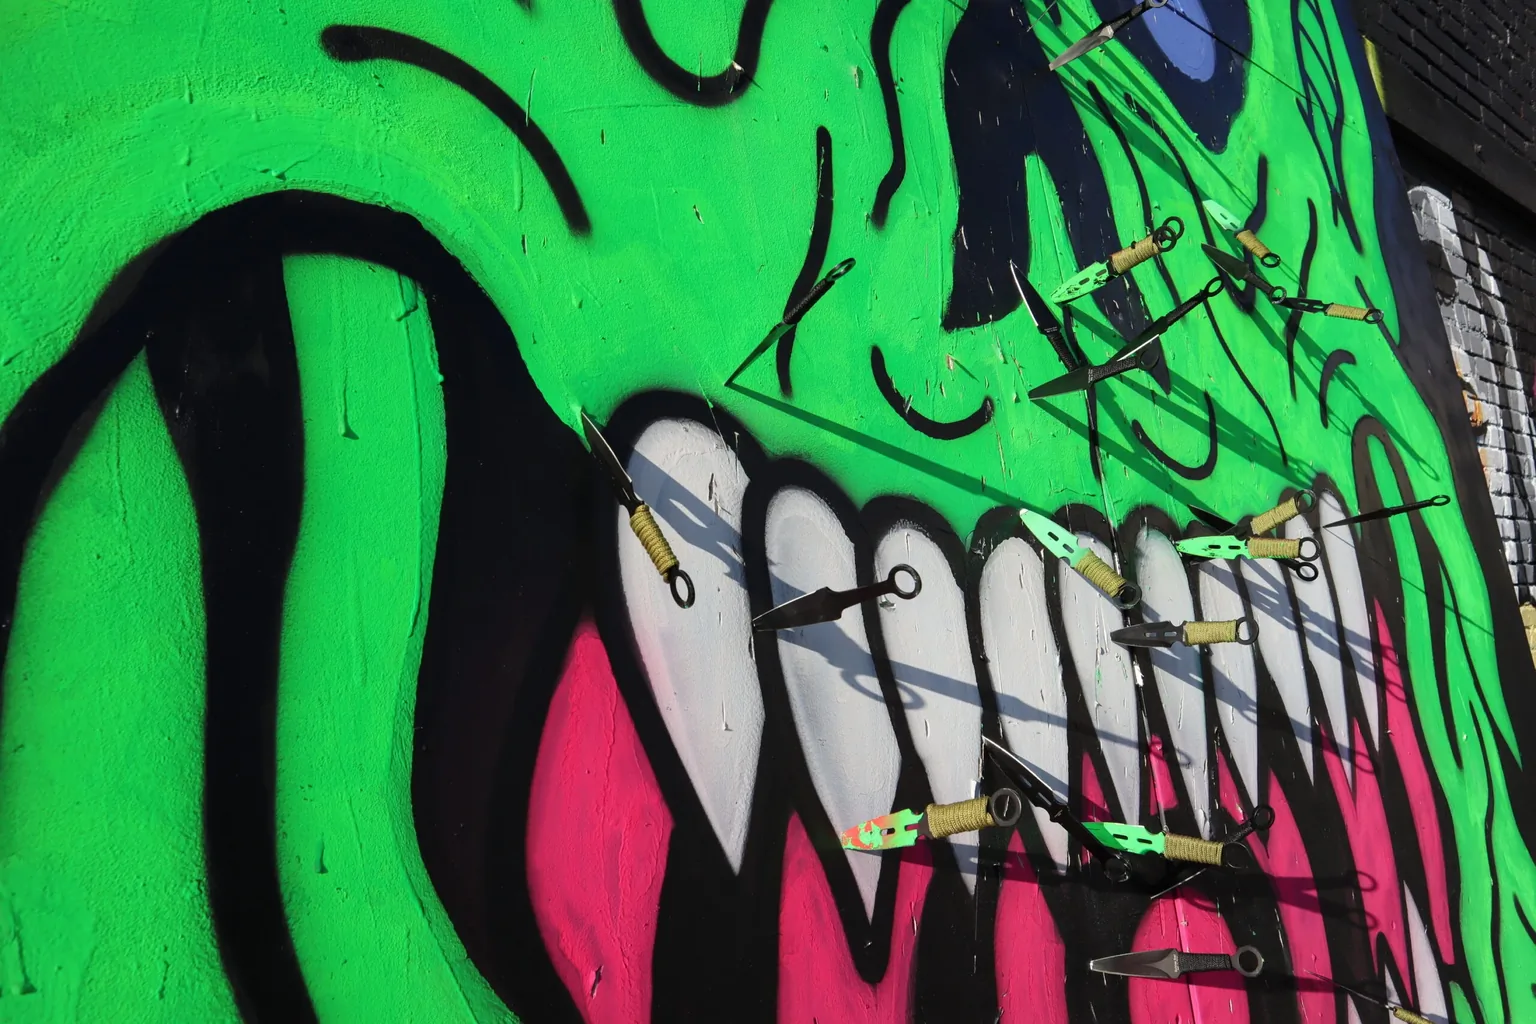 Closeup photo of Will Carsola's painting of the green demon's mouth with knives thrown at him.